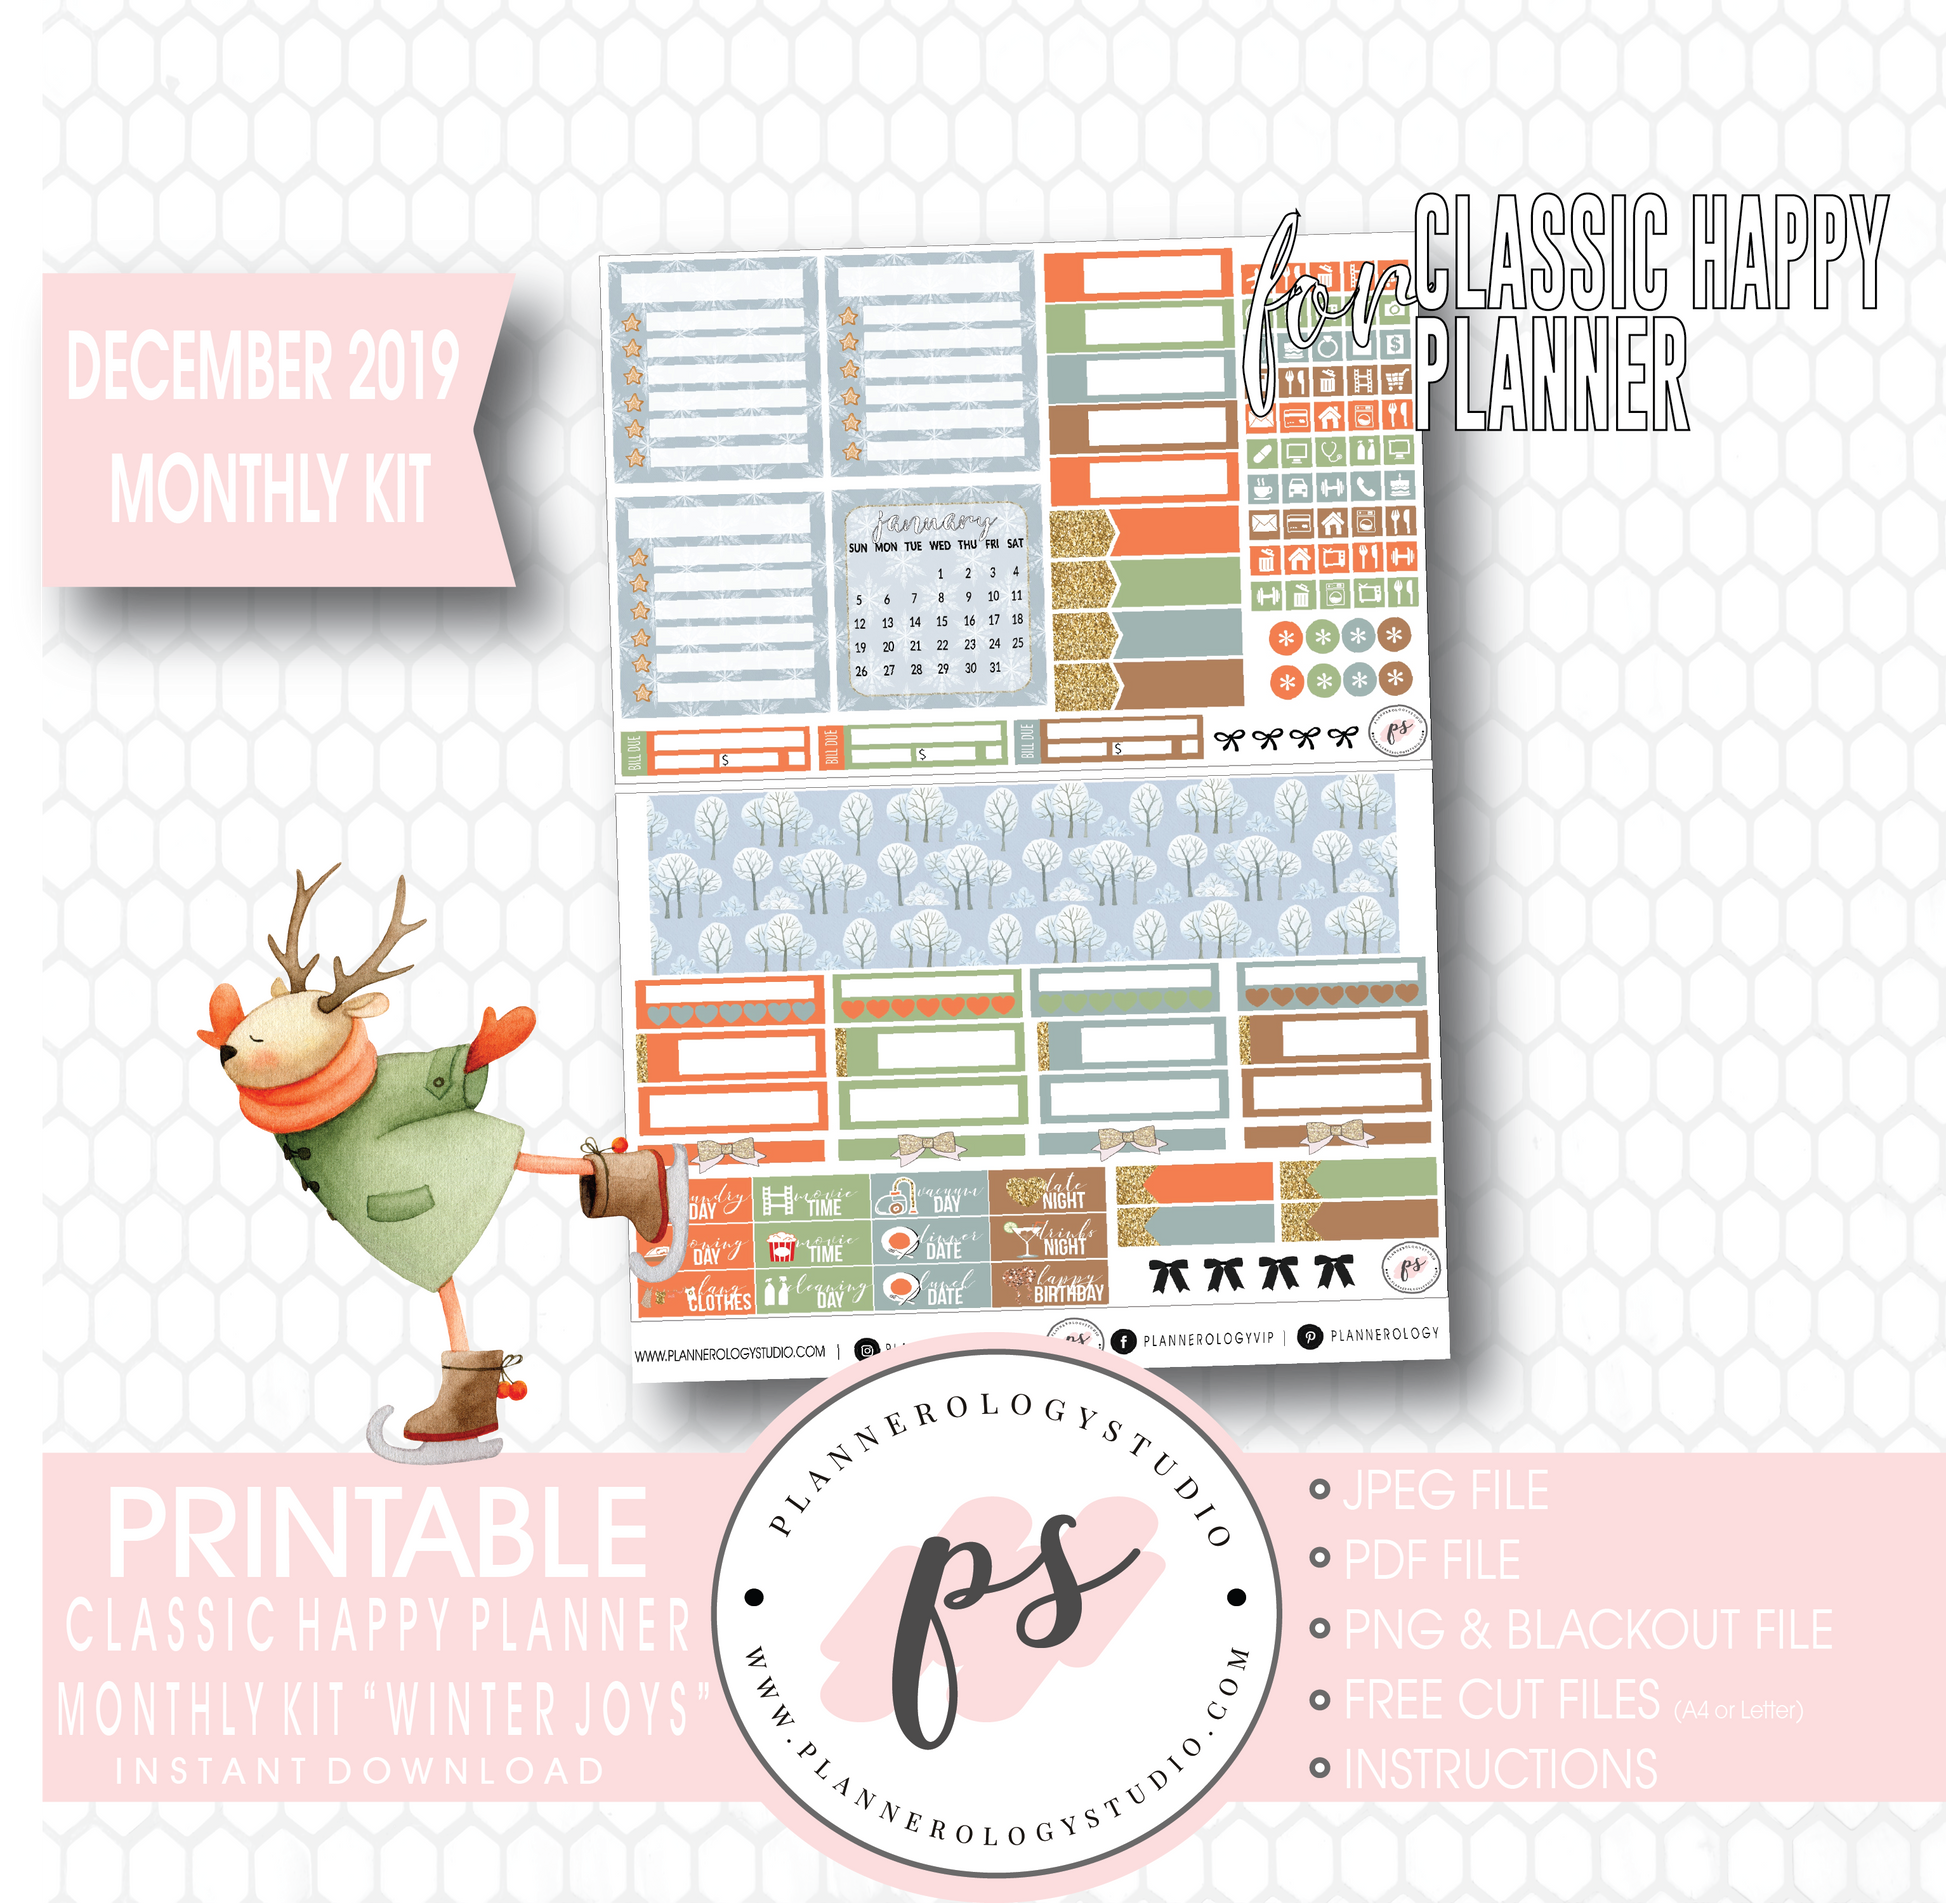 Winter Joys December 2019 Monthly View Kit Digital Printable Planner Stickers (for use with Classic Happy Planner) - Plannerologystudio